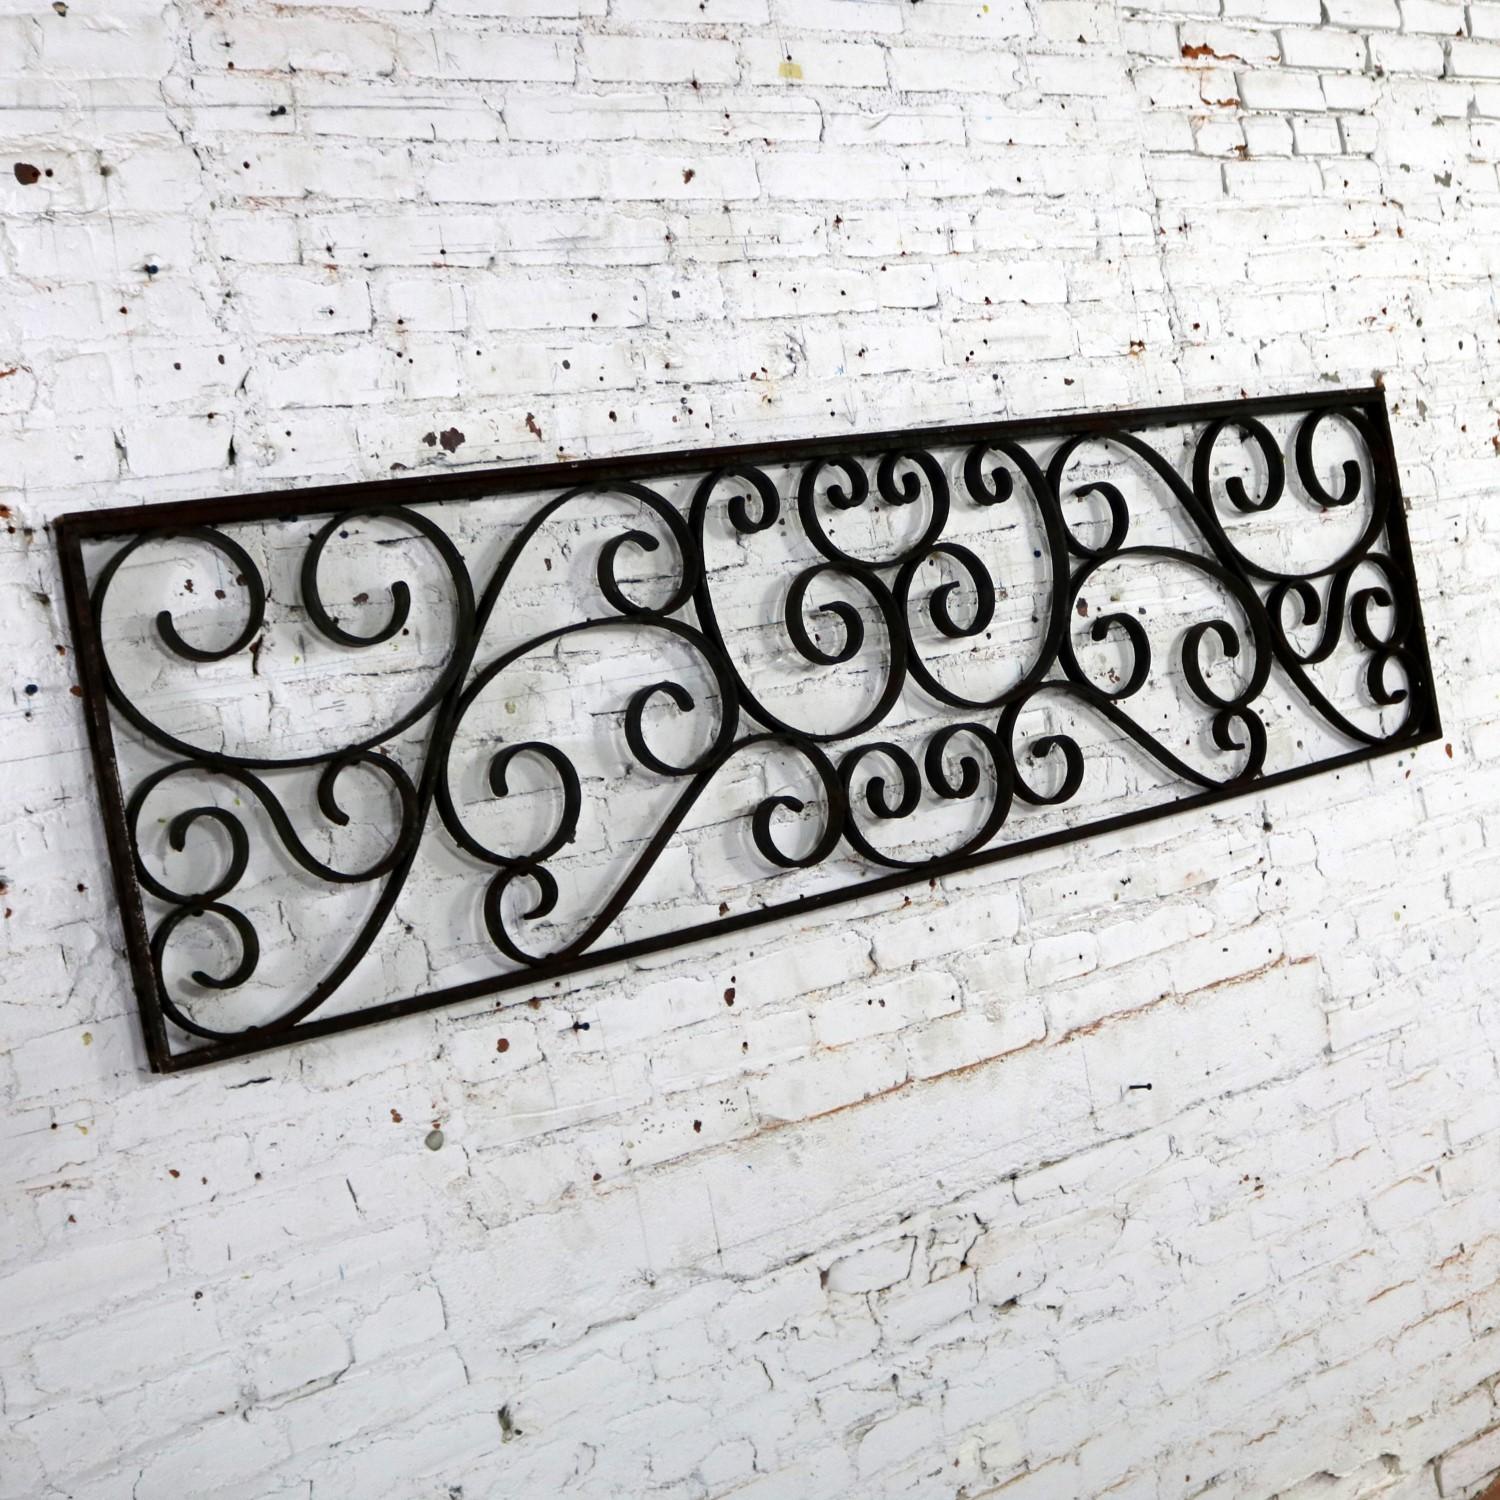 Antique Swirled Design Wrought Iron Railing Piece Trellis or Fence Section In Good Condition For Sale In Topeka, KS